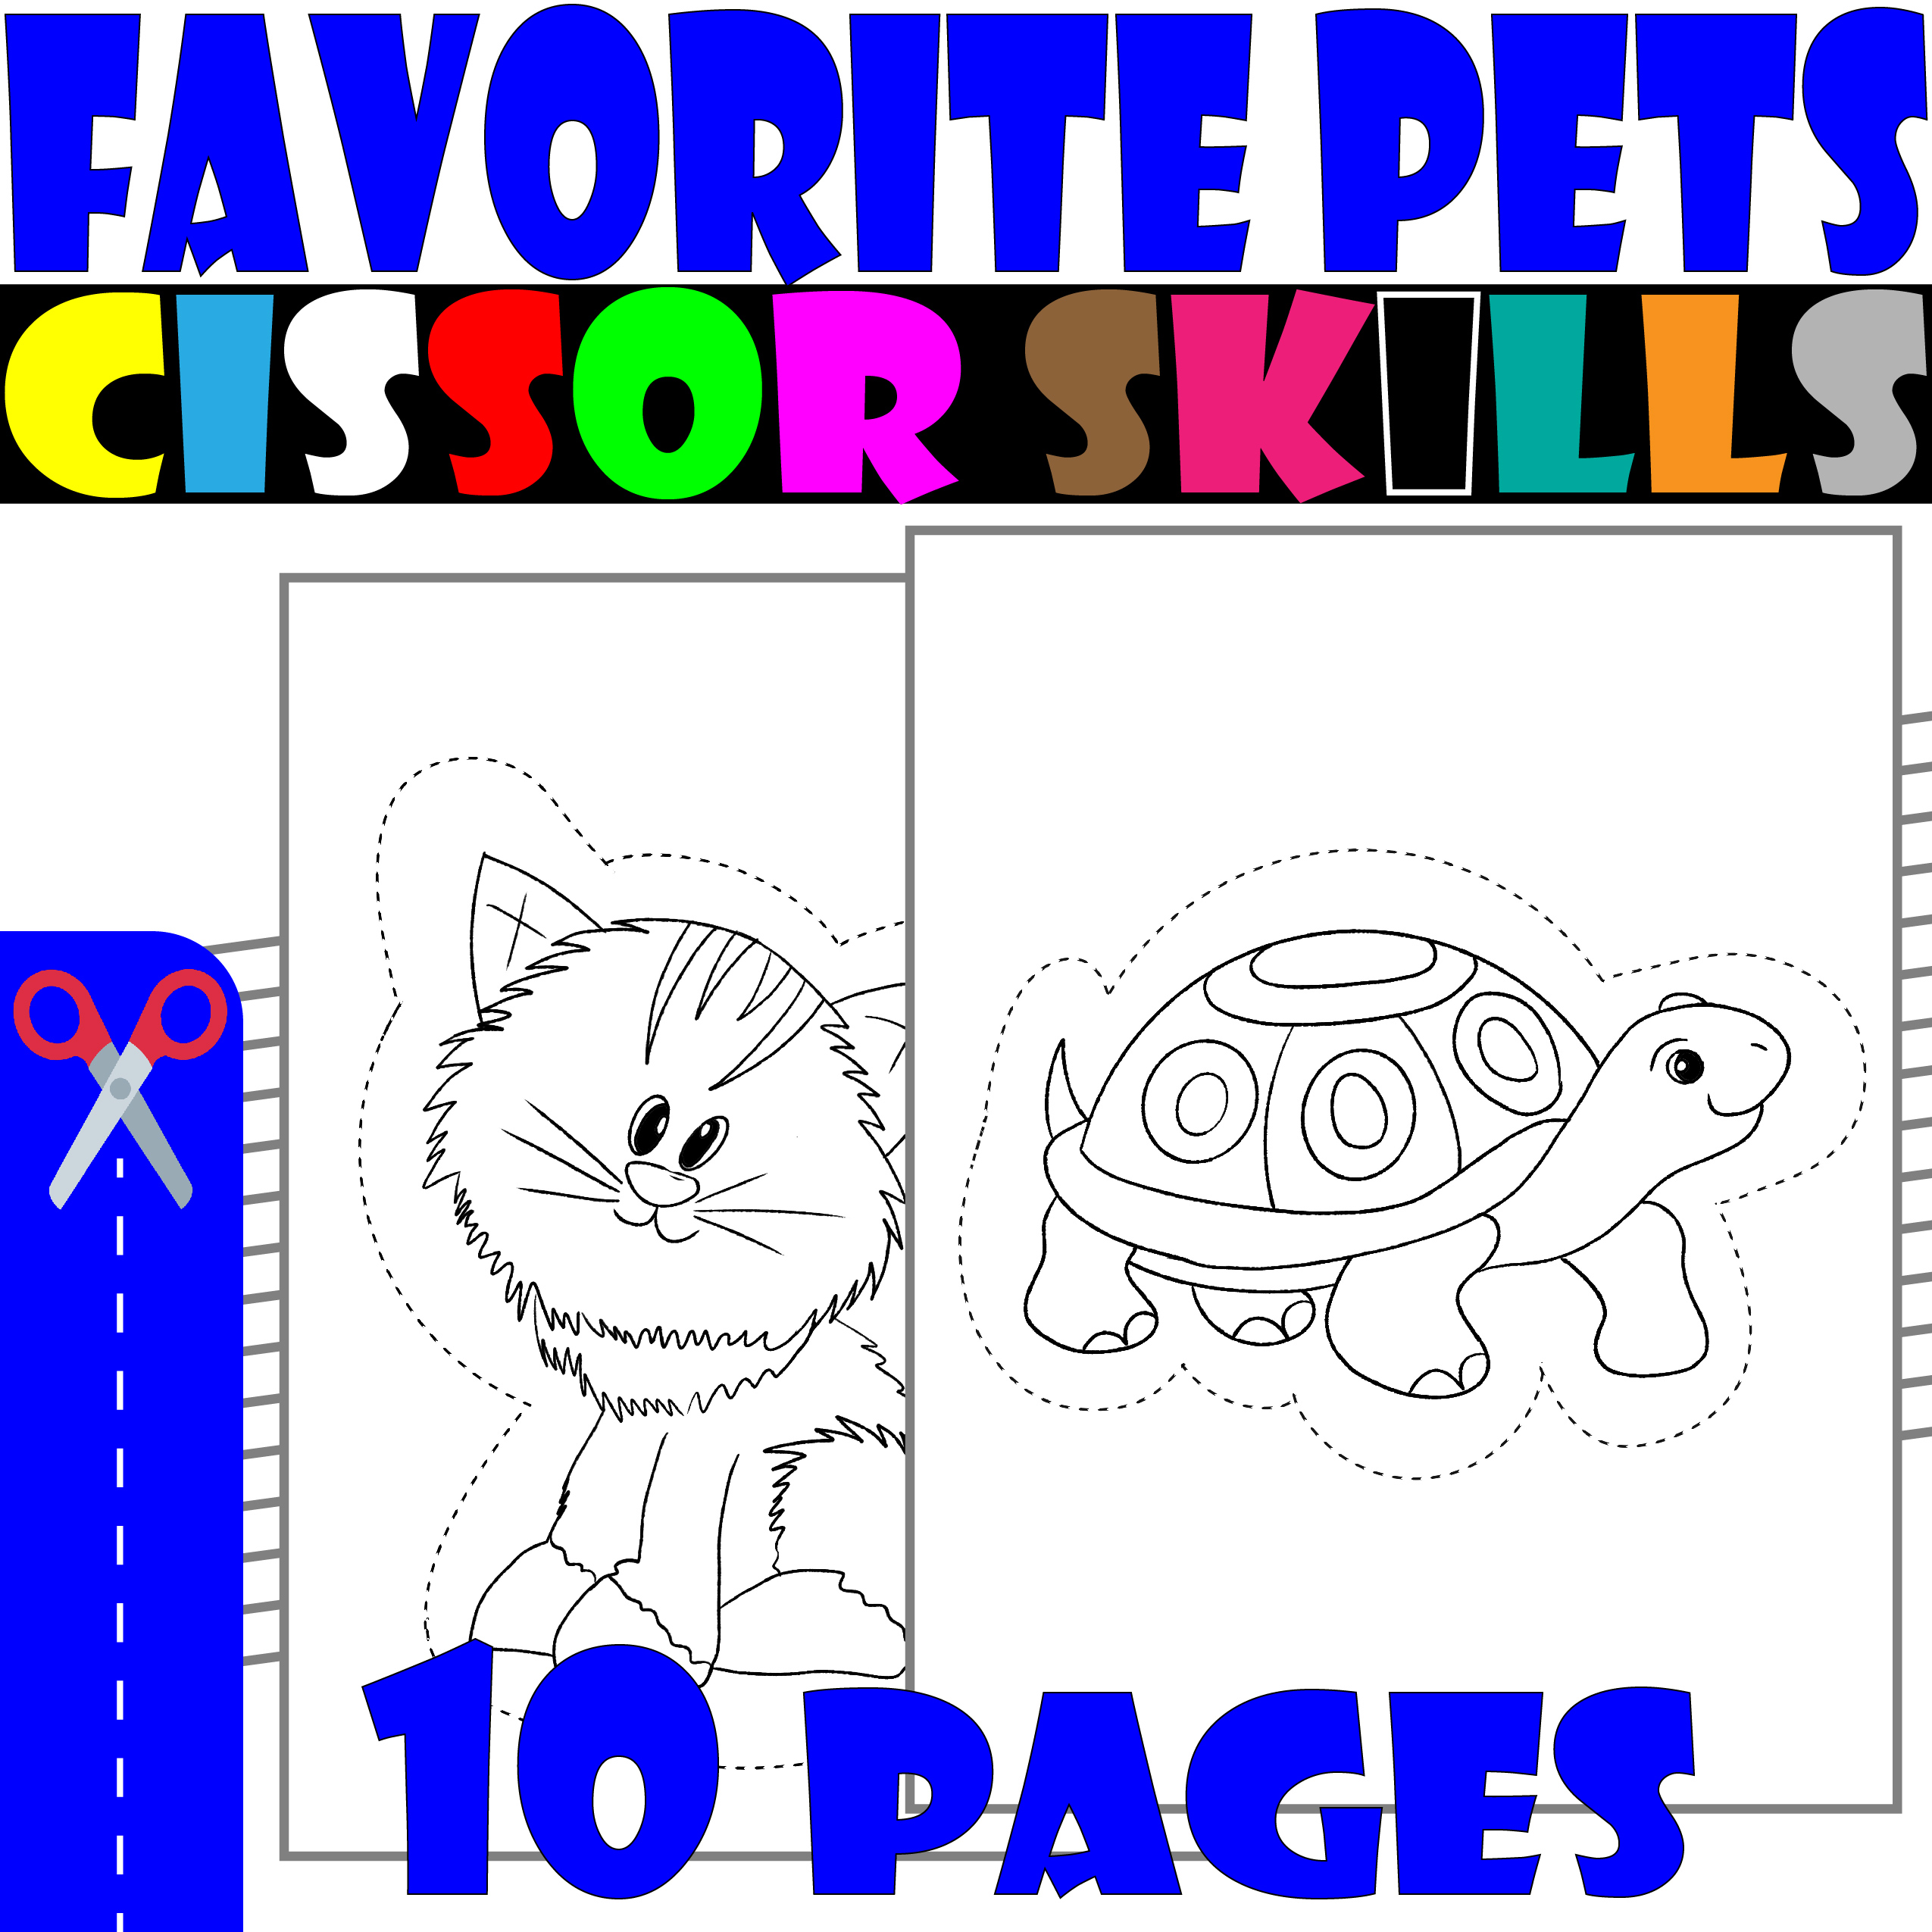 Favorite pets scissor skills and coloring for kids pets scissor skills made by teachers